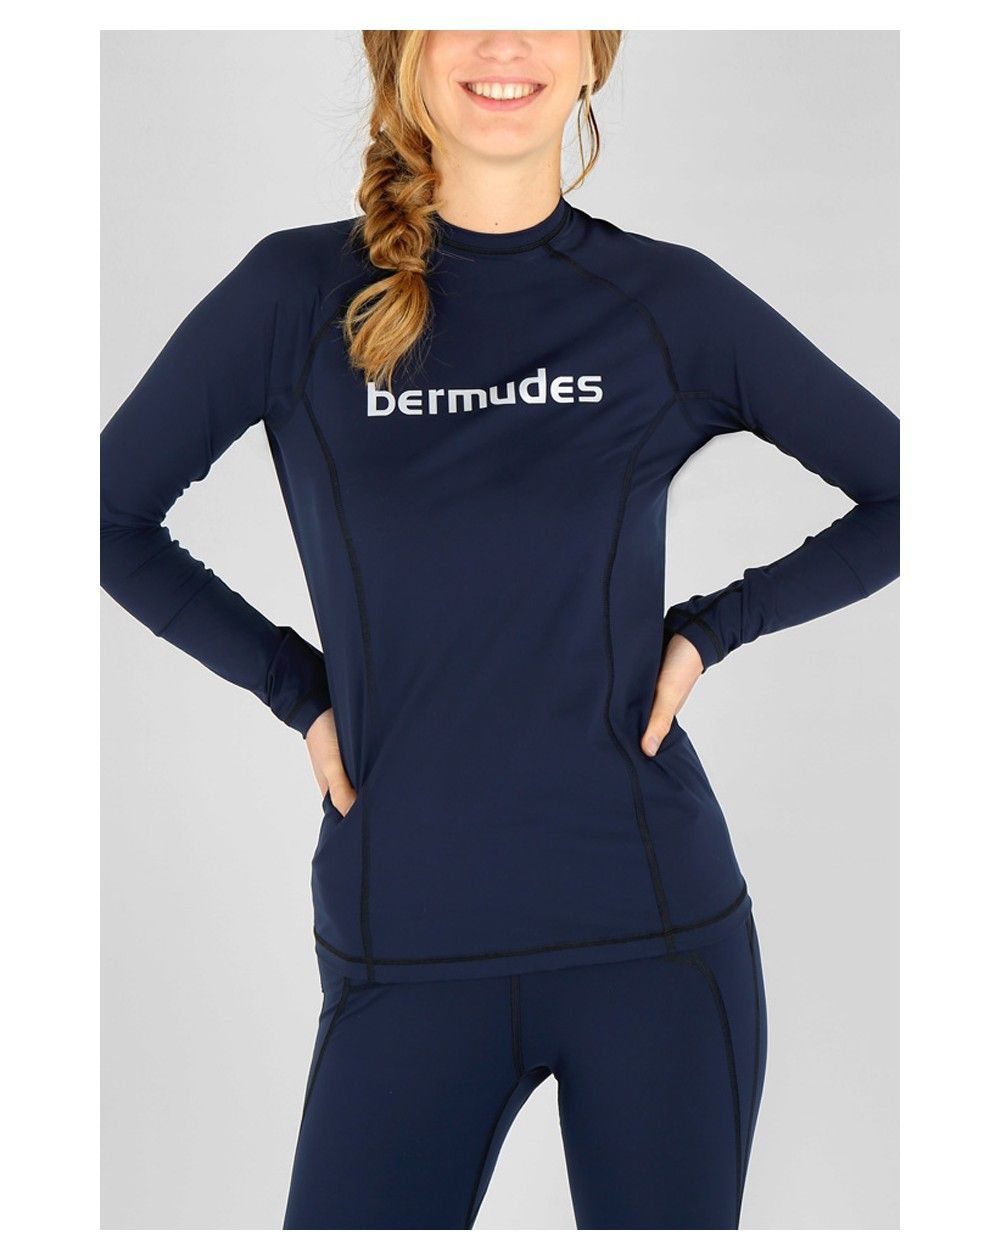 tee-shirt thermique contre le froid Olivianna navy